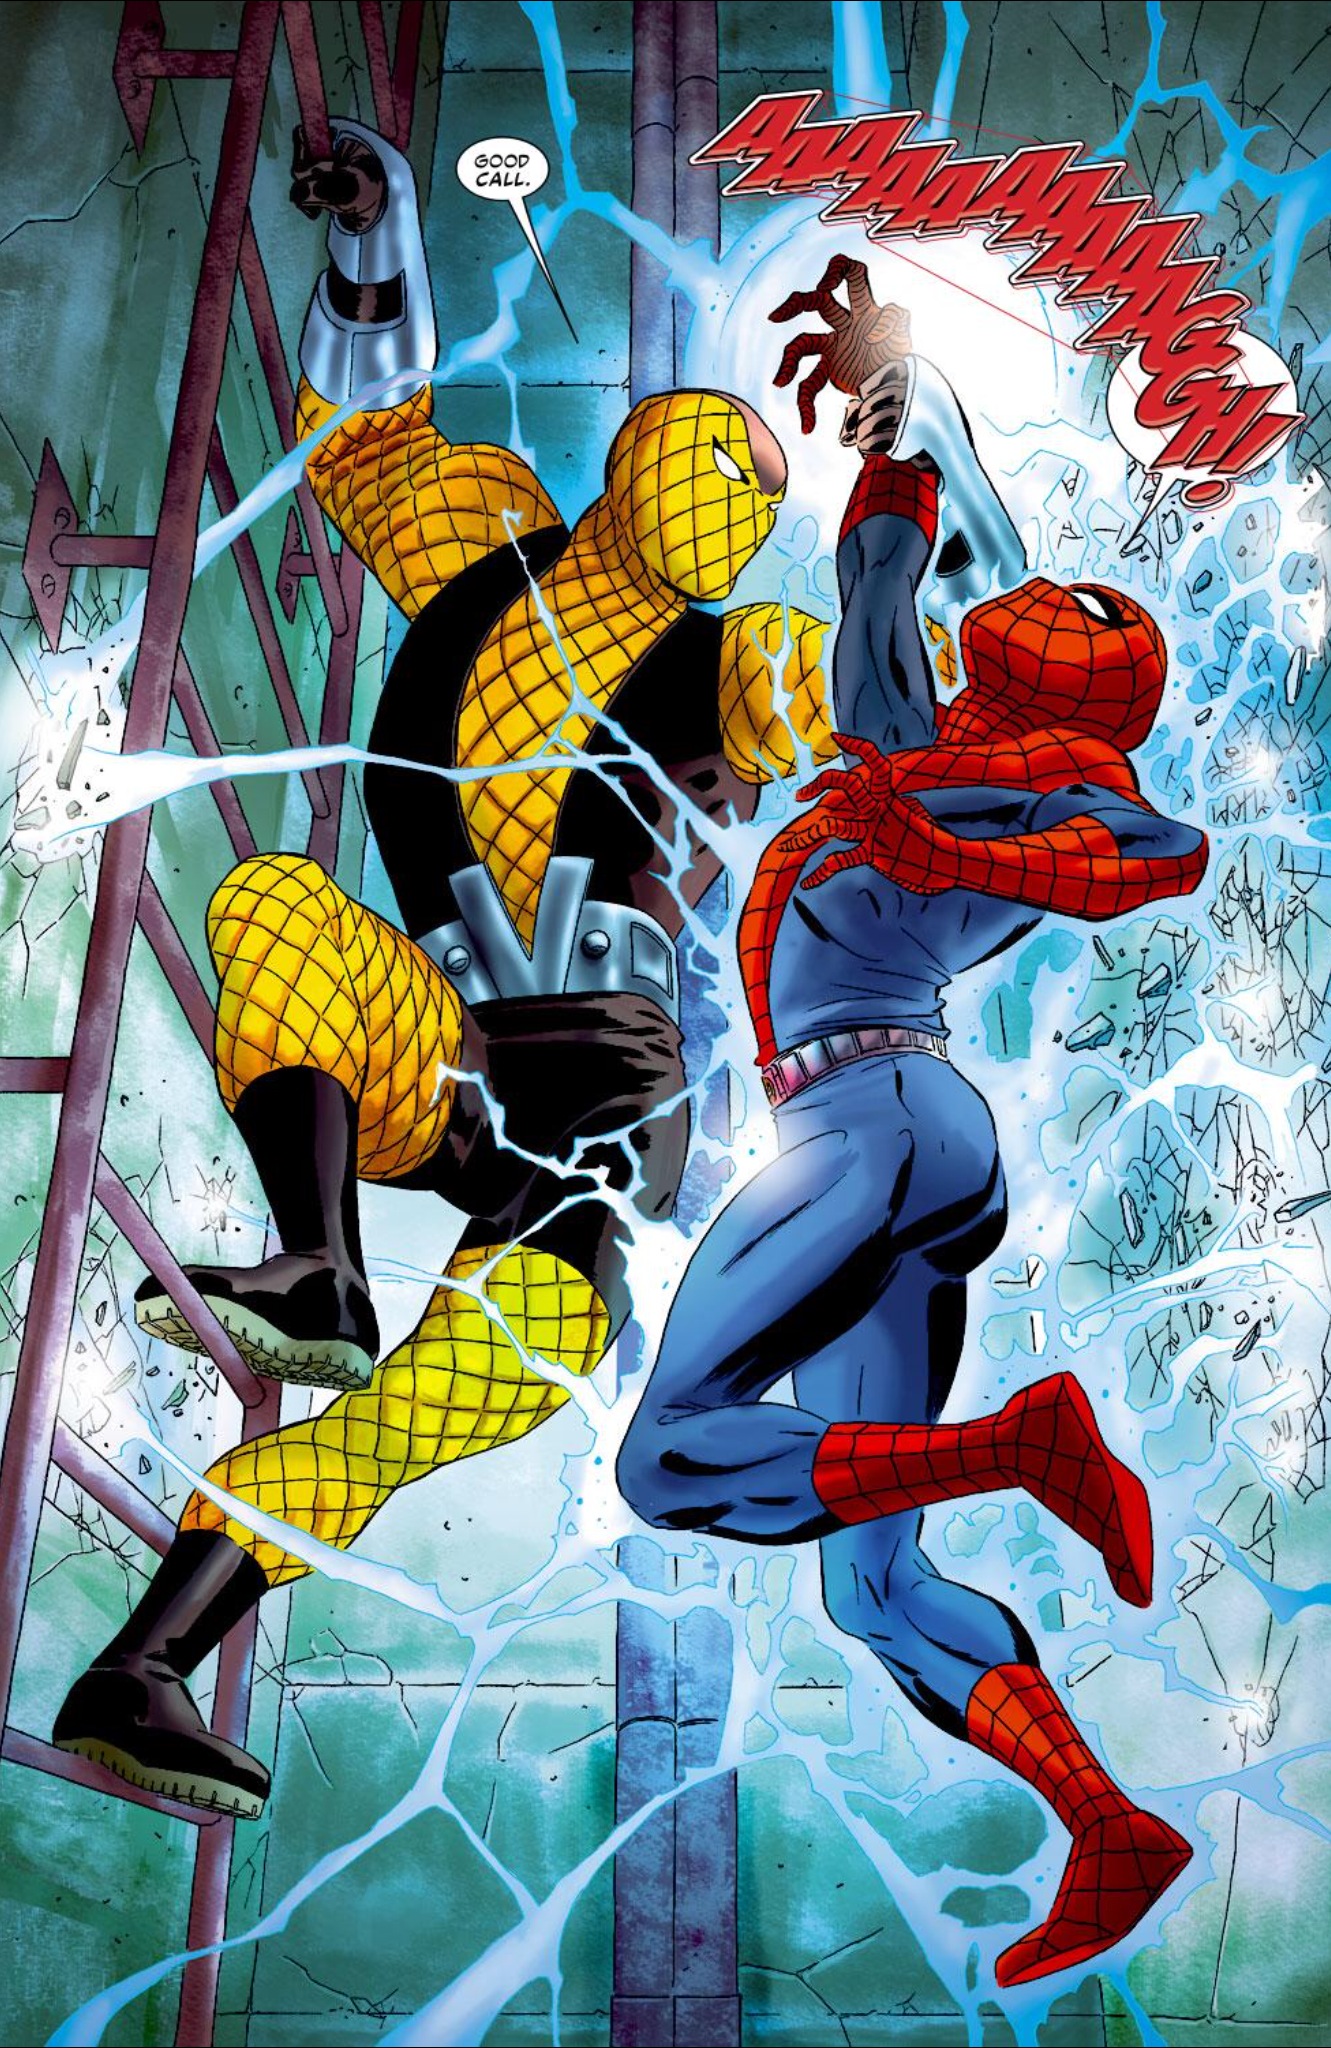 The Shocker: The Spider-Man Foe's 5 Most Humiliating Moments